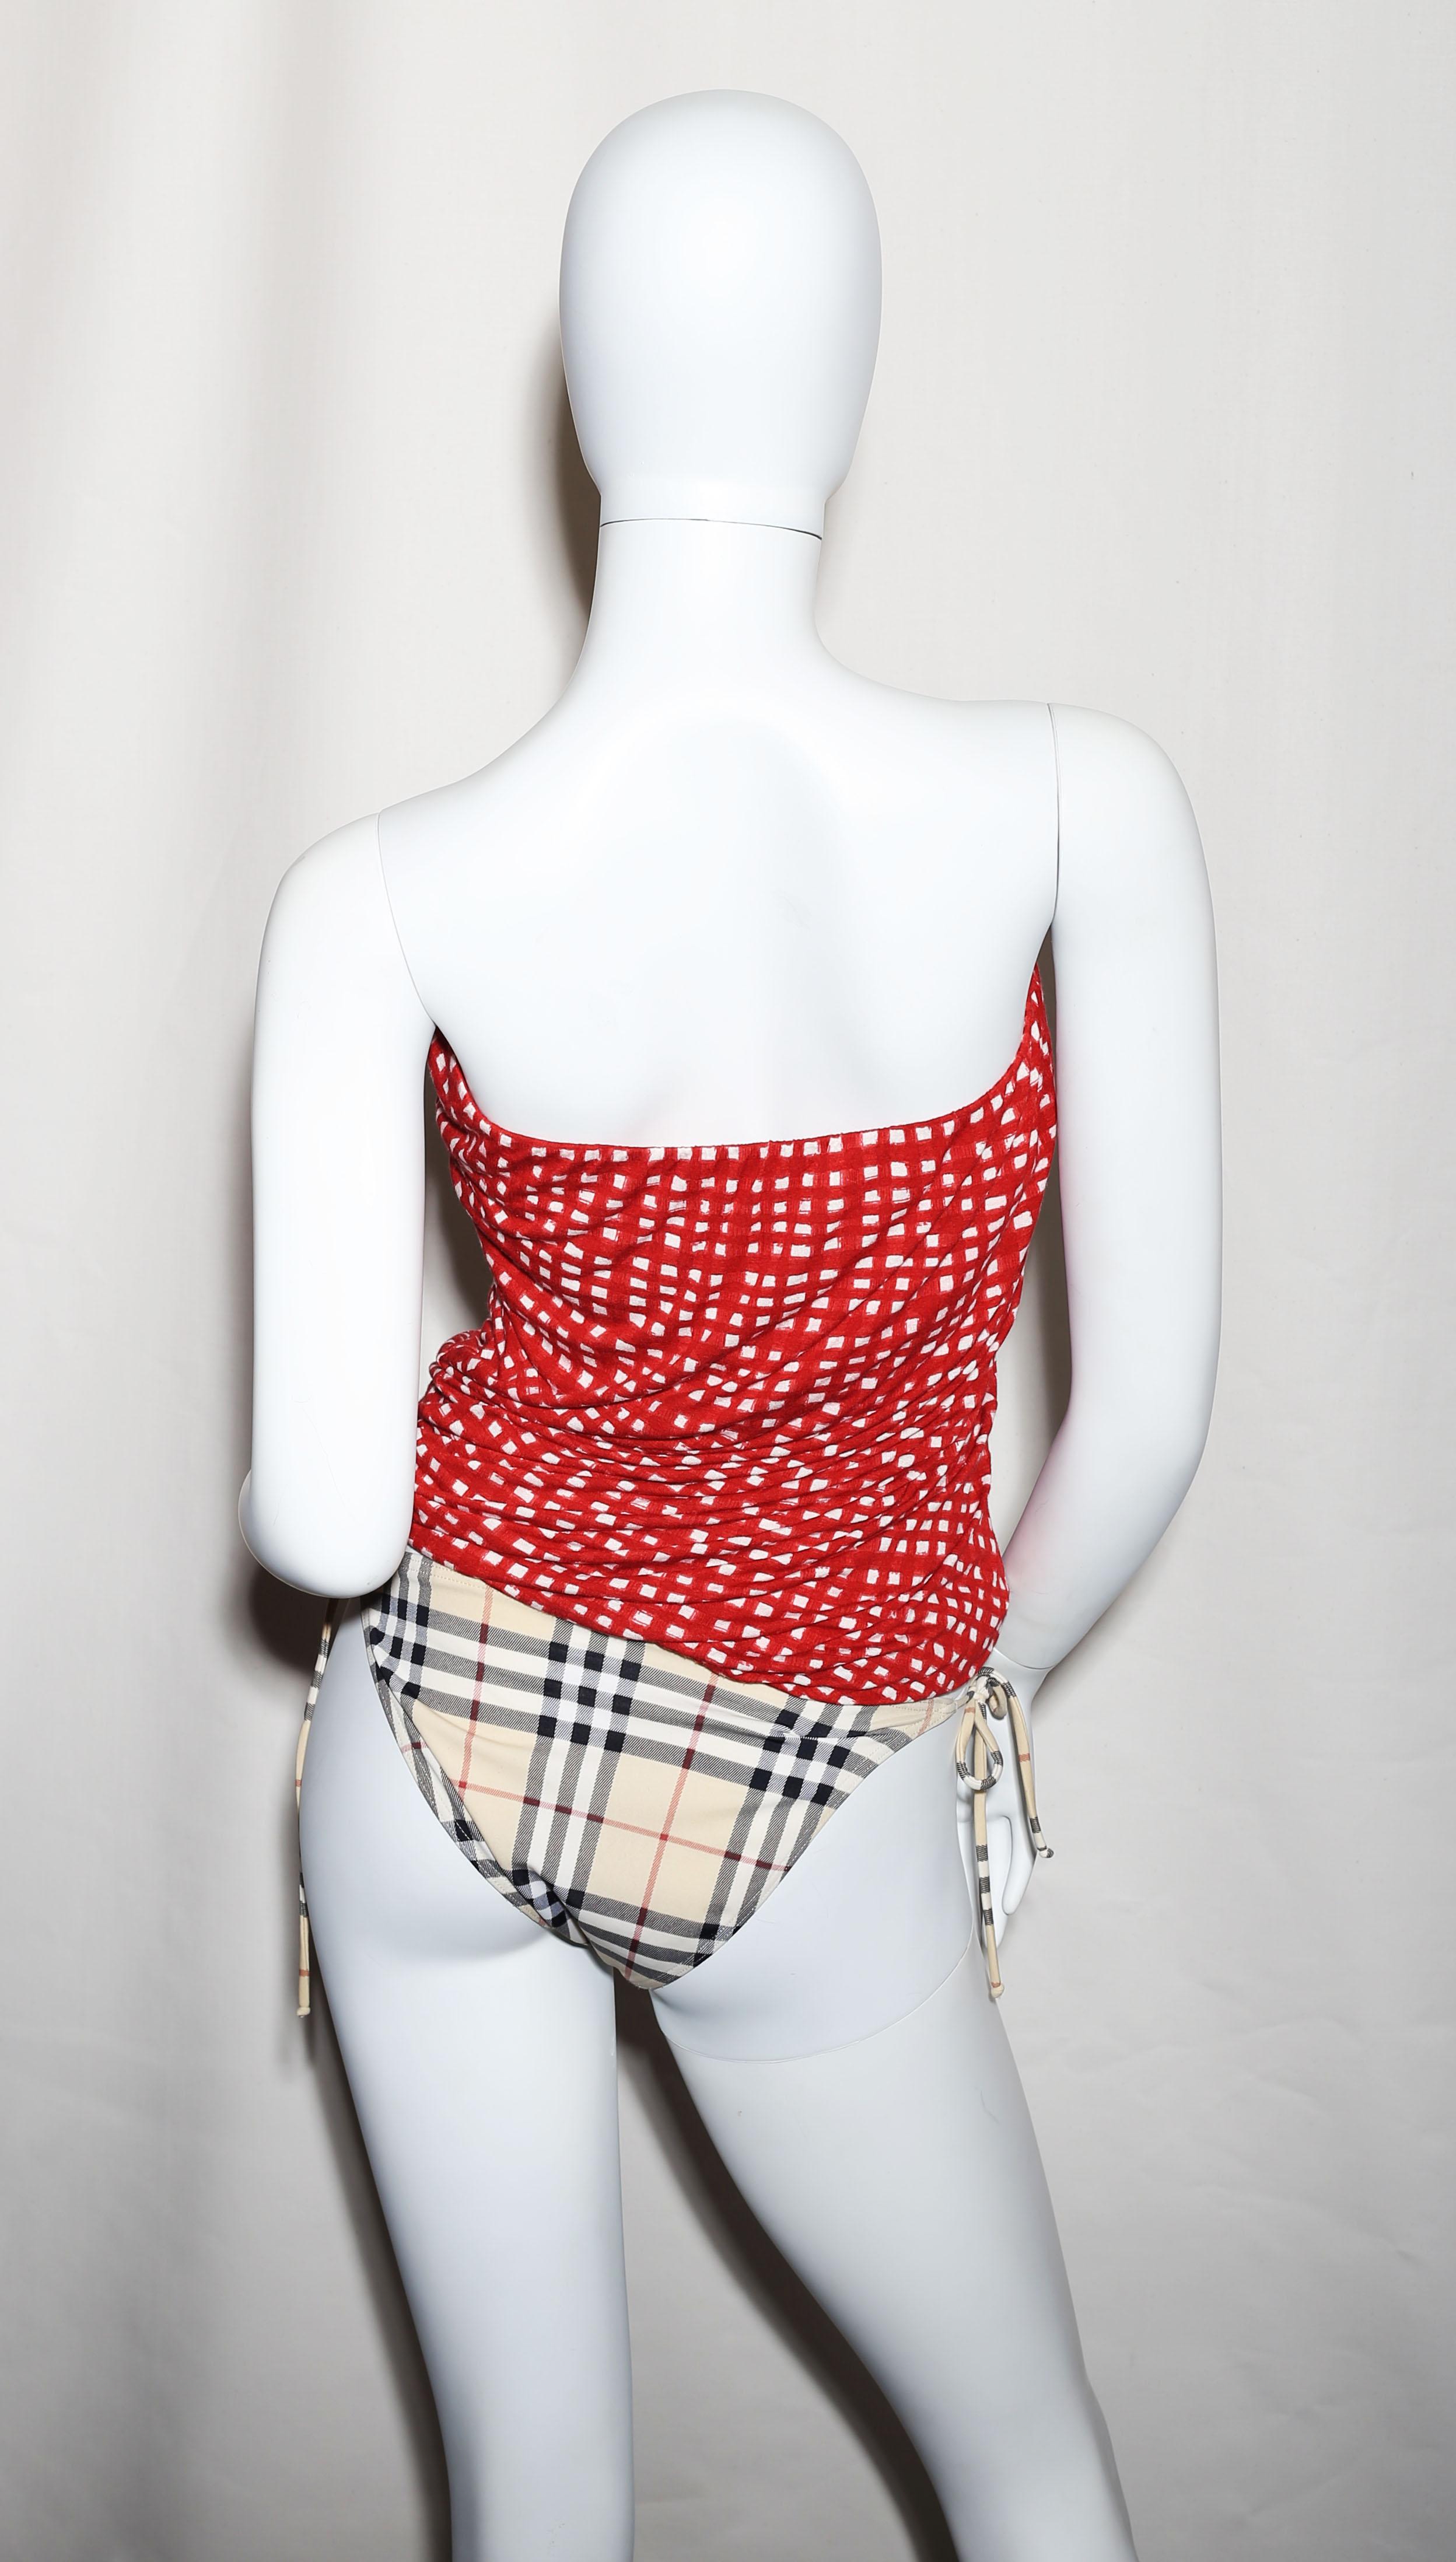 Paul Smith cropped top in red and white vichy pattern 
Elastyne and cotton Elastyc very summery and easy to use
Mediterranean and  and French Riviera Look
Size Large 
Designer women's top, Whether for layers or finishing up a fashionable outfit,